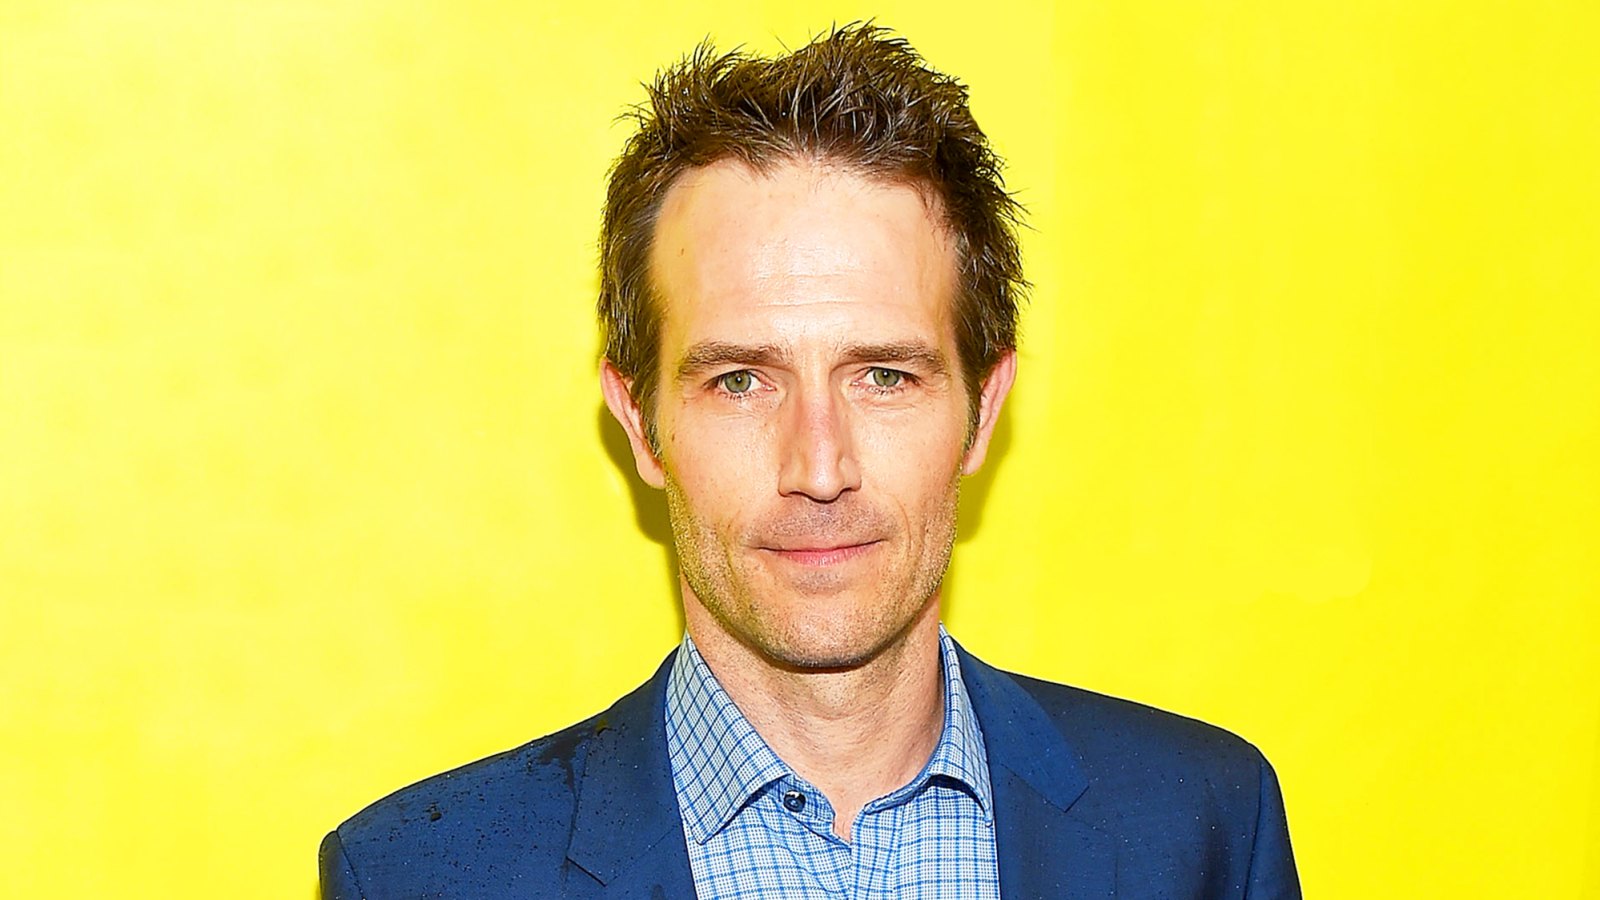 Michael Vartan attends the "Small Town Crime" premiere 2017 SXSW Conference and Festivals in Austin, Texas.